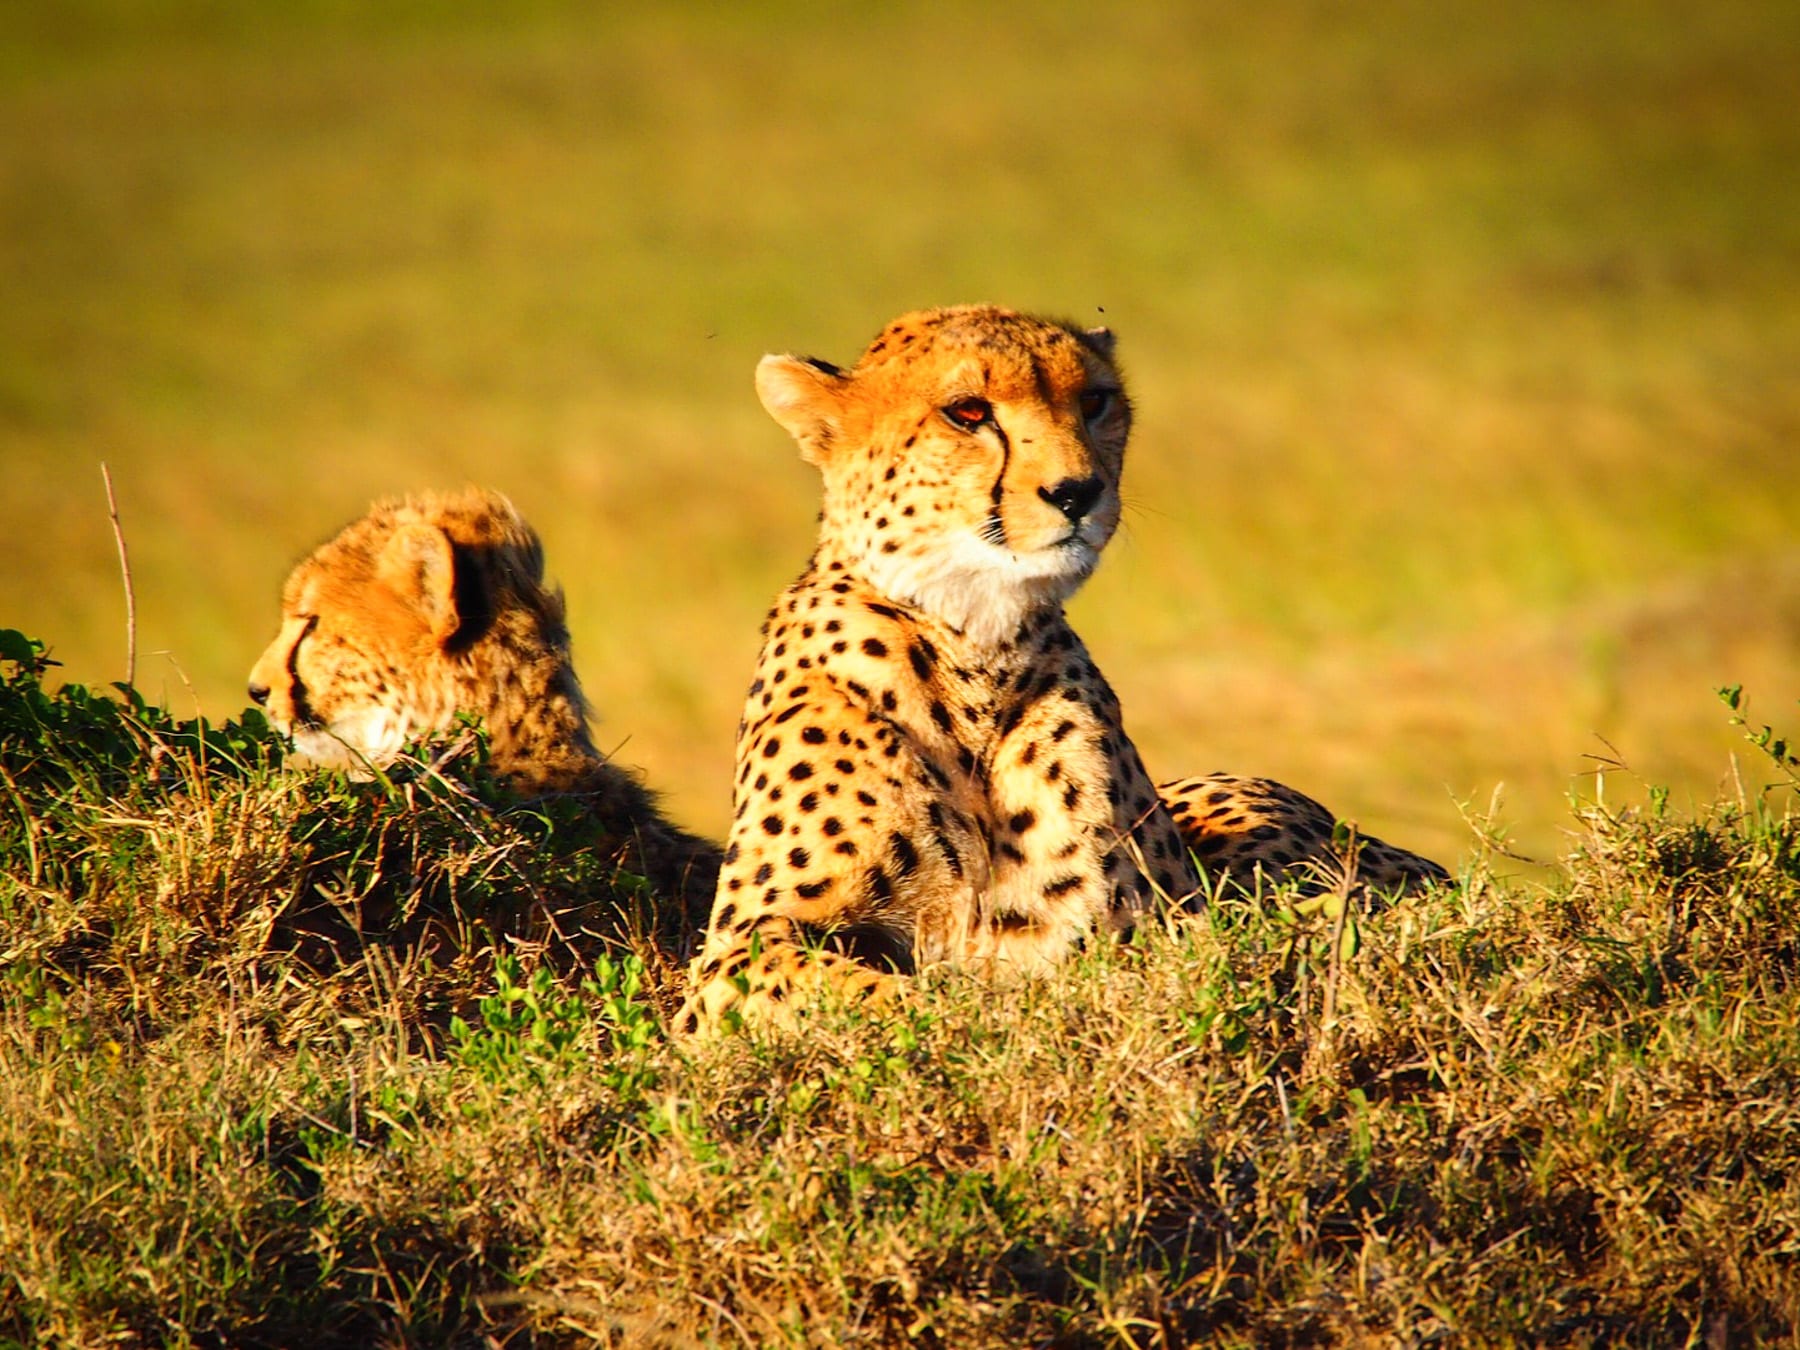 Kenya is proud to be the home of safari and has been recognised as the leading safari destination since 2015. Image by lajon, Pixabay.com.